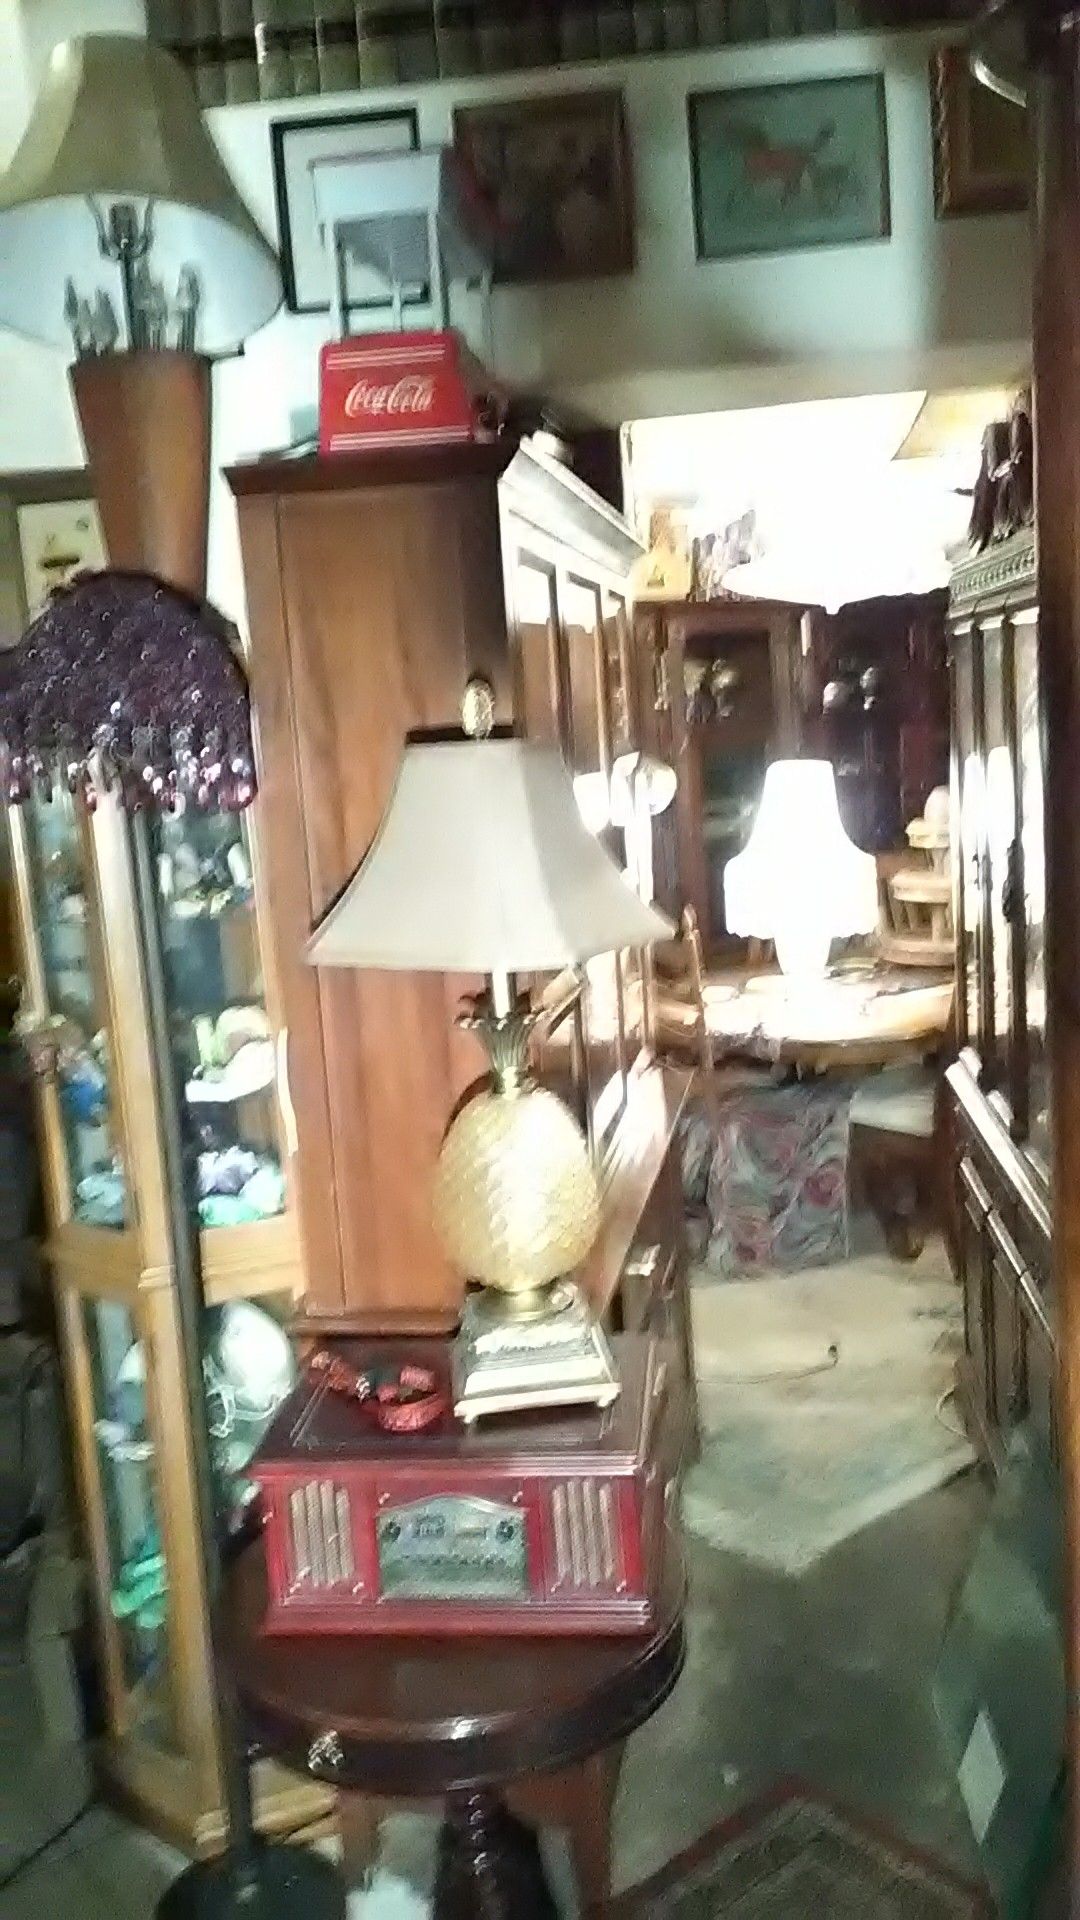 Giant estate sale over 300 collections of collectibles and antiques